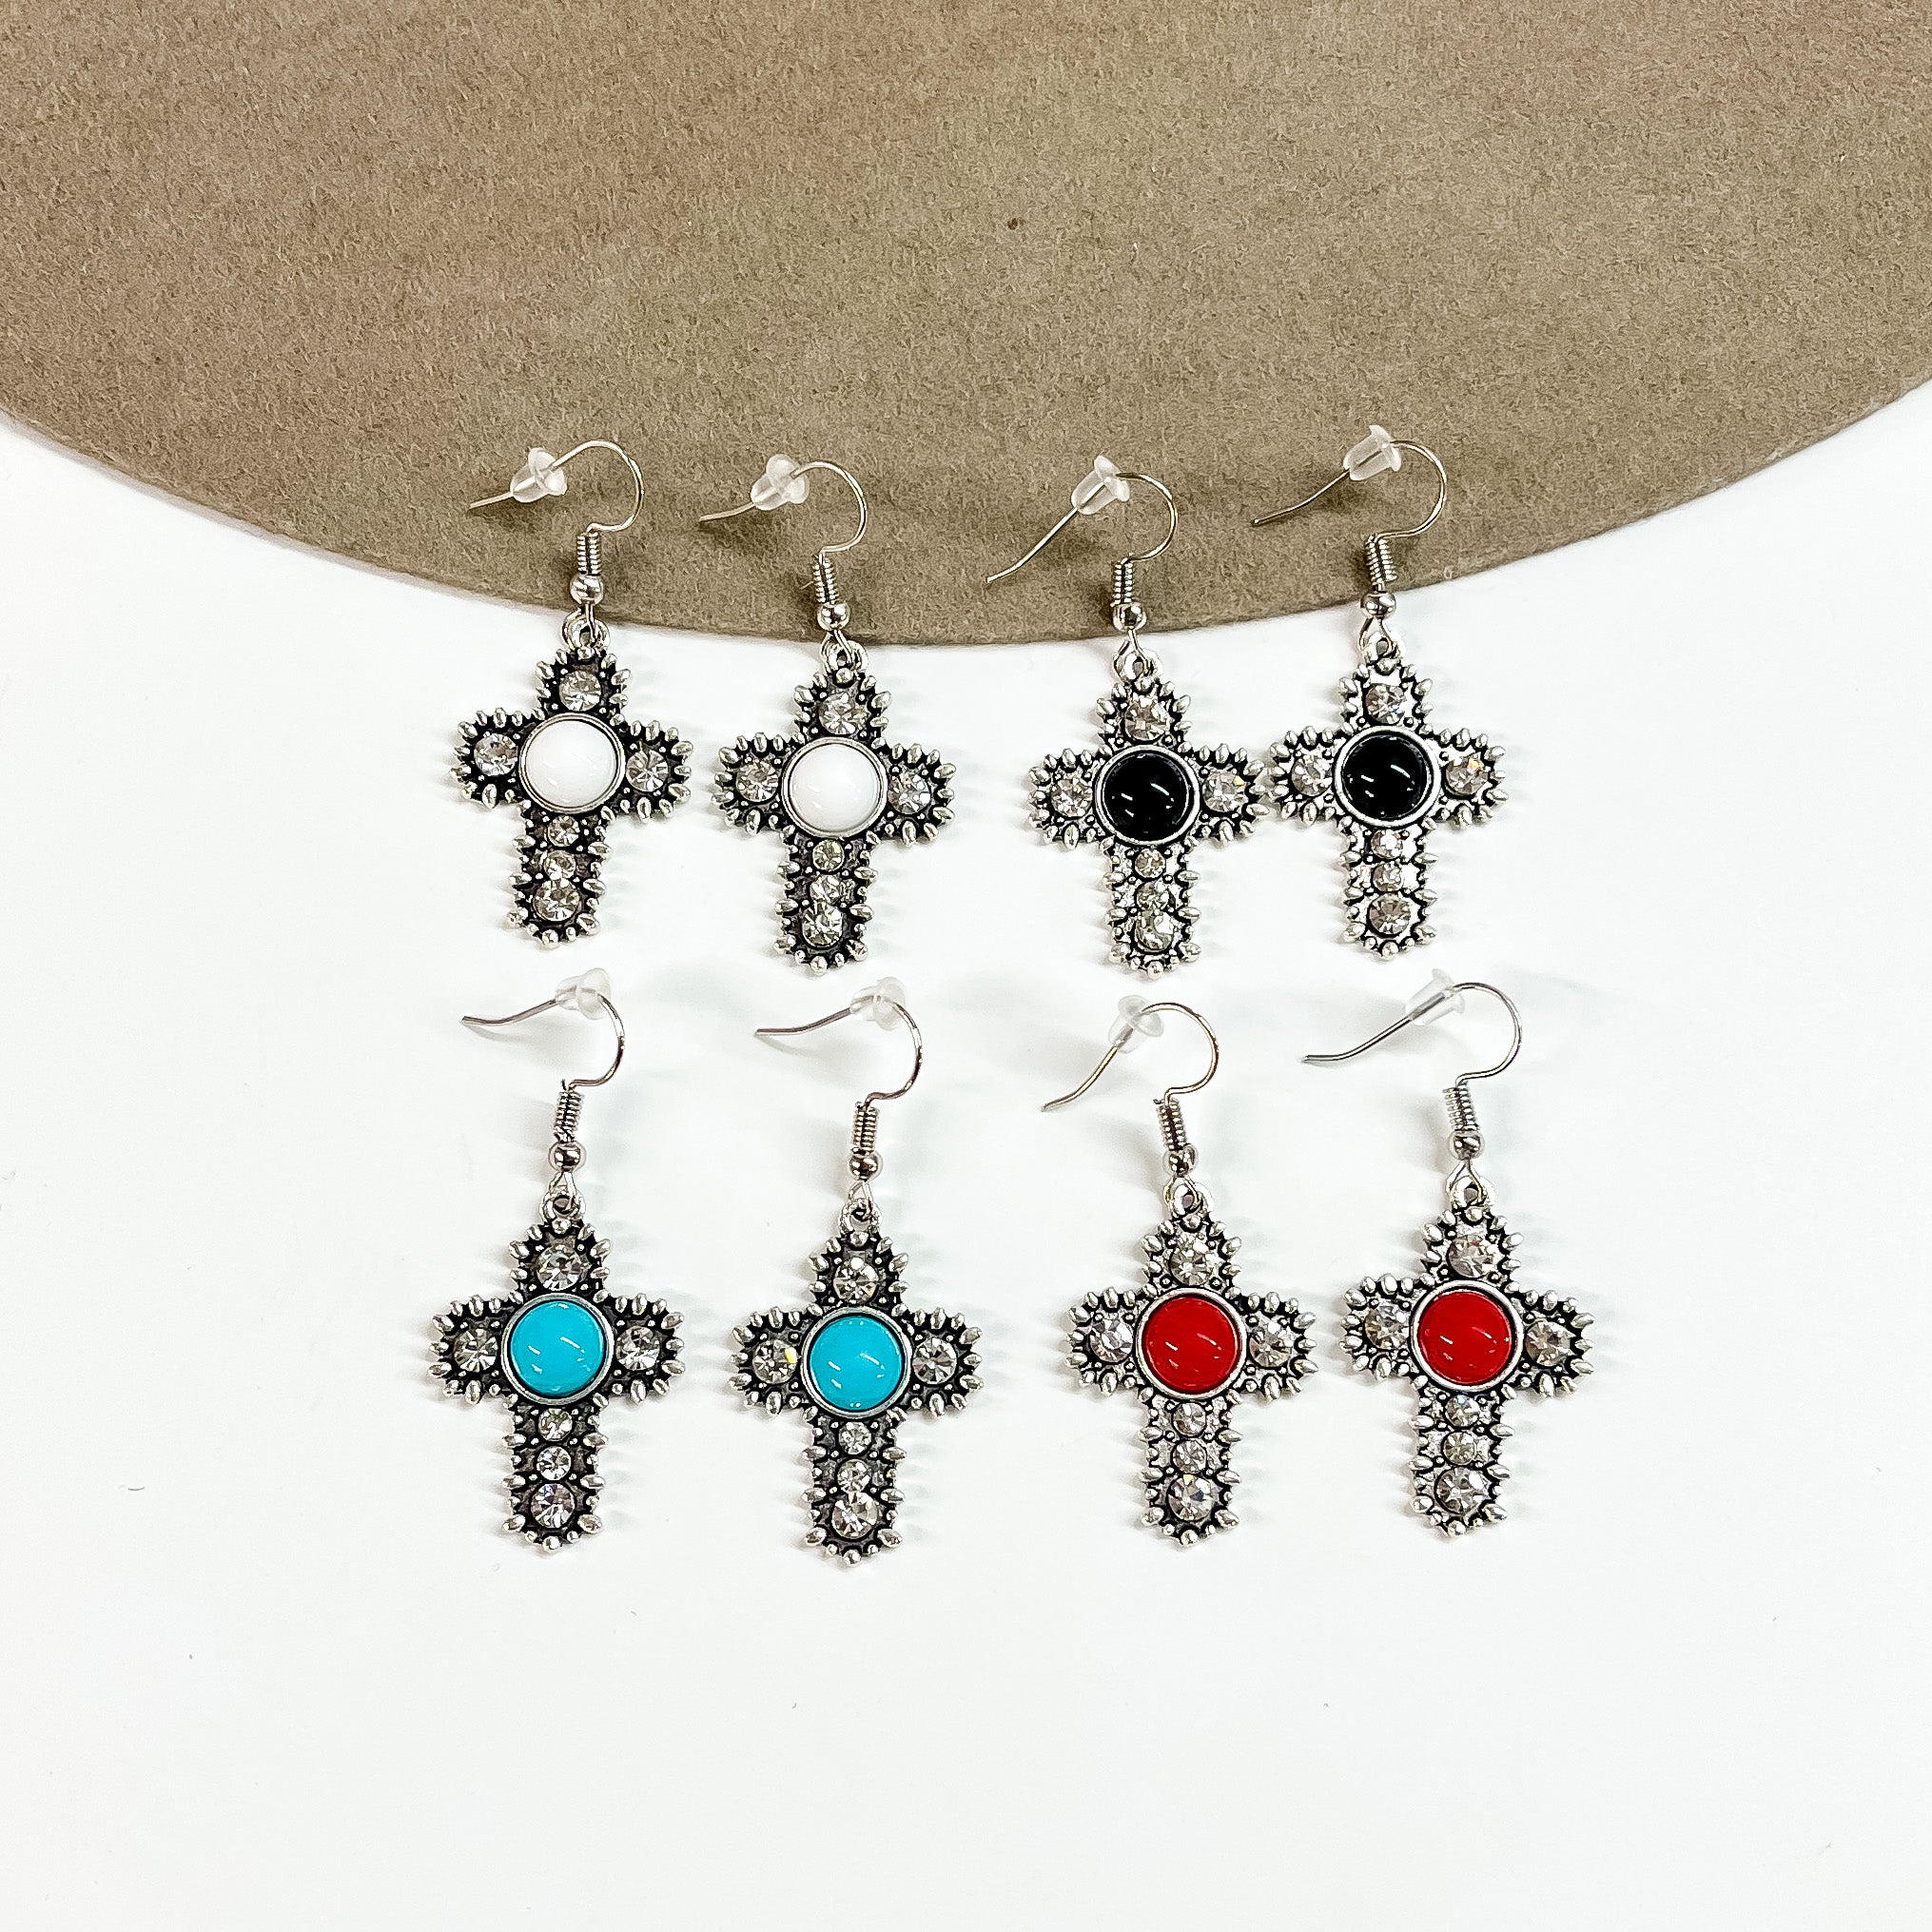 There are four pairs of silver detailed cross earrings with different colored stones in the center. From top to bottom; white, black, turquoise, and red. These earrings are taken partly laying on a brown felt hat brim and on white background.